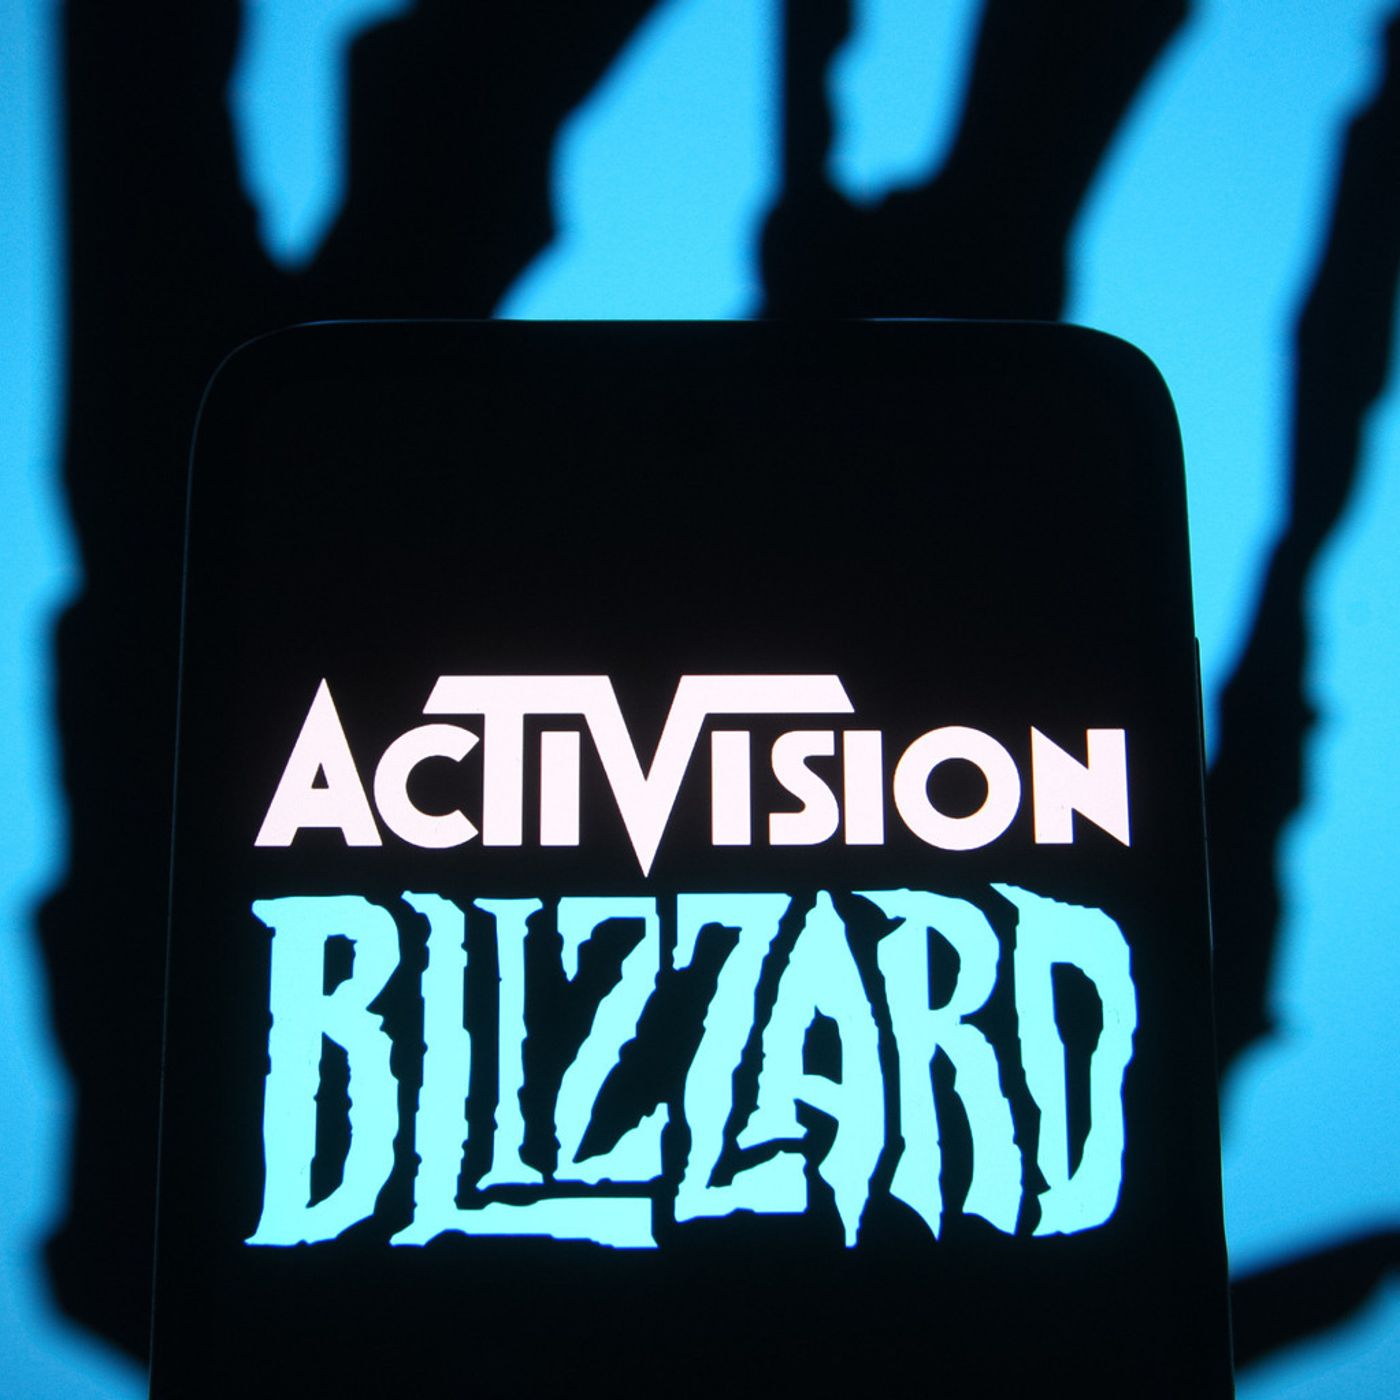 S17 Ep1187: Xbox to buy Activision Blizzard